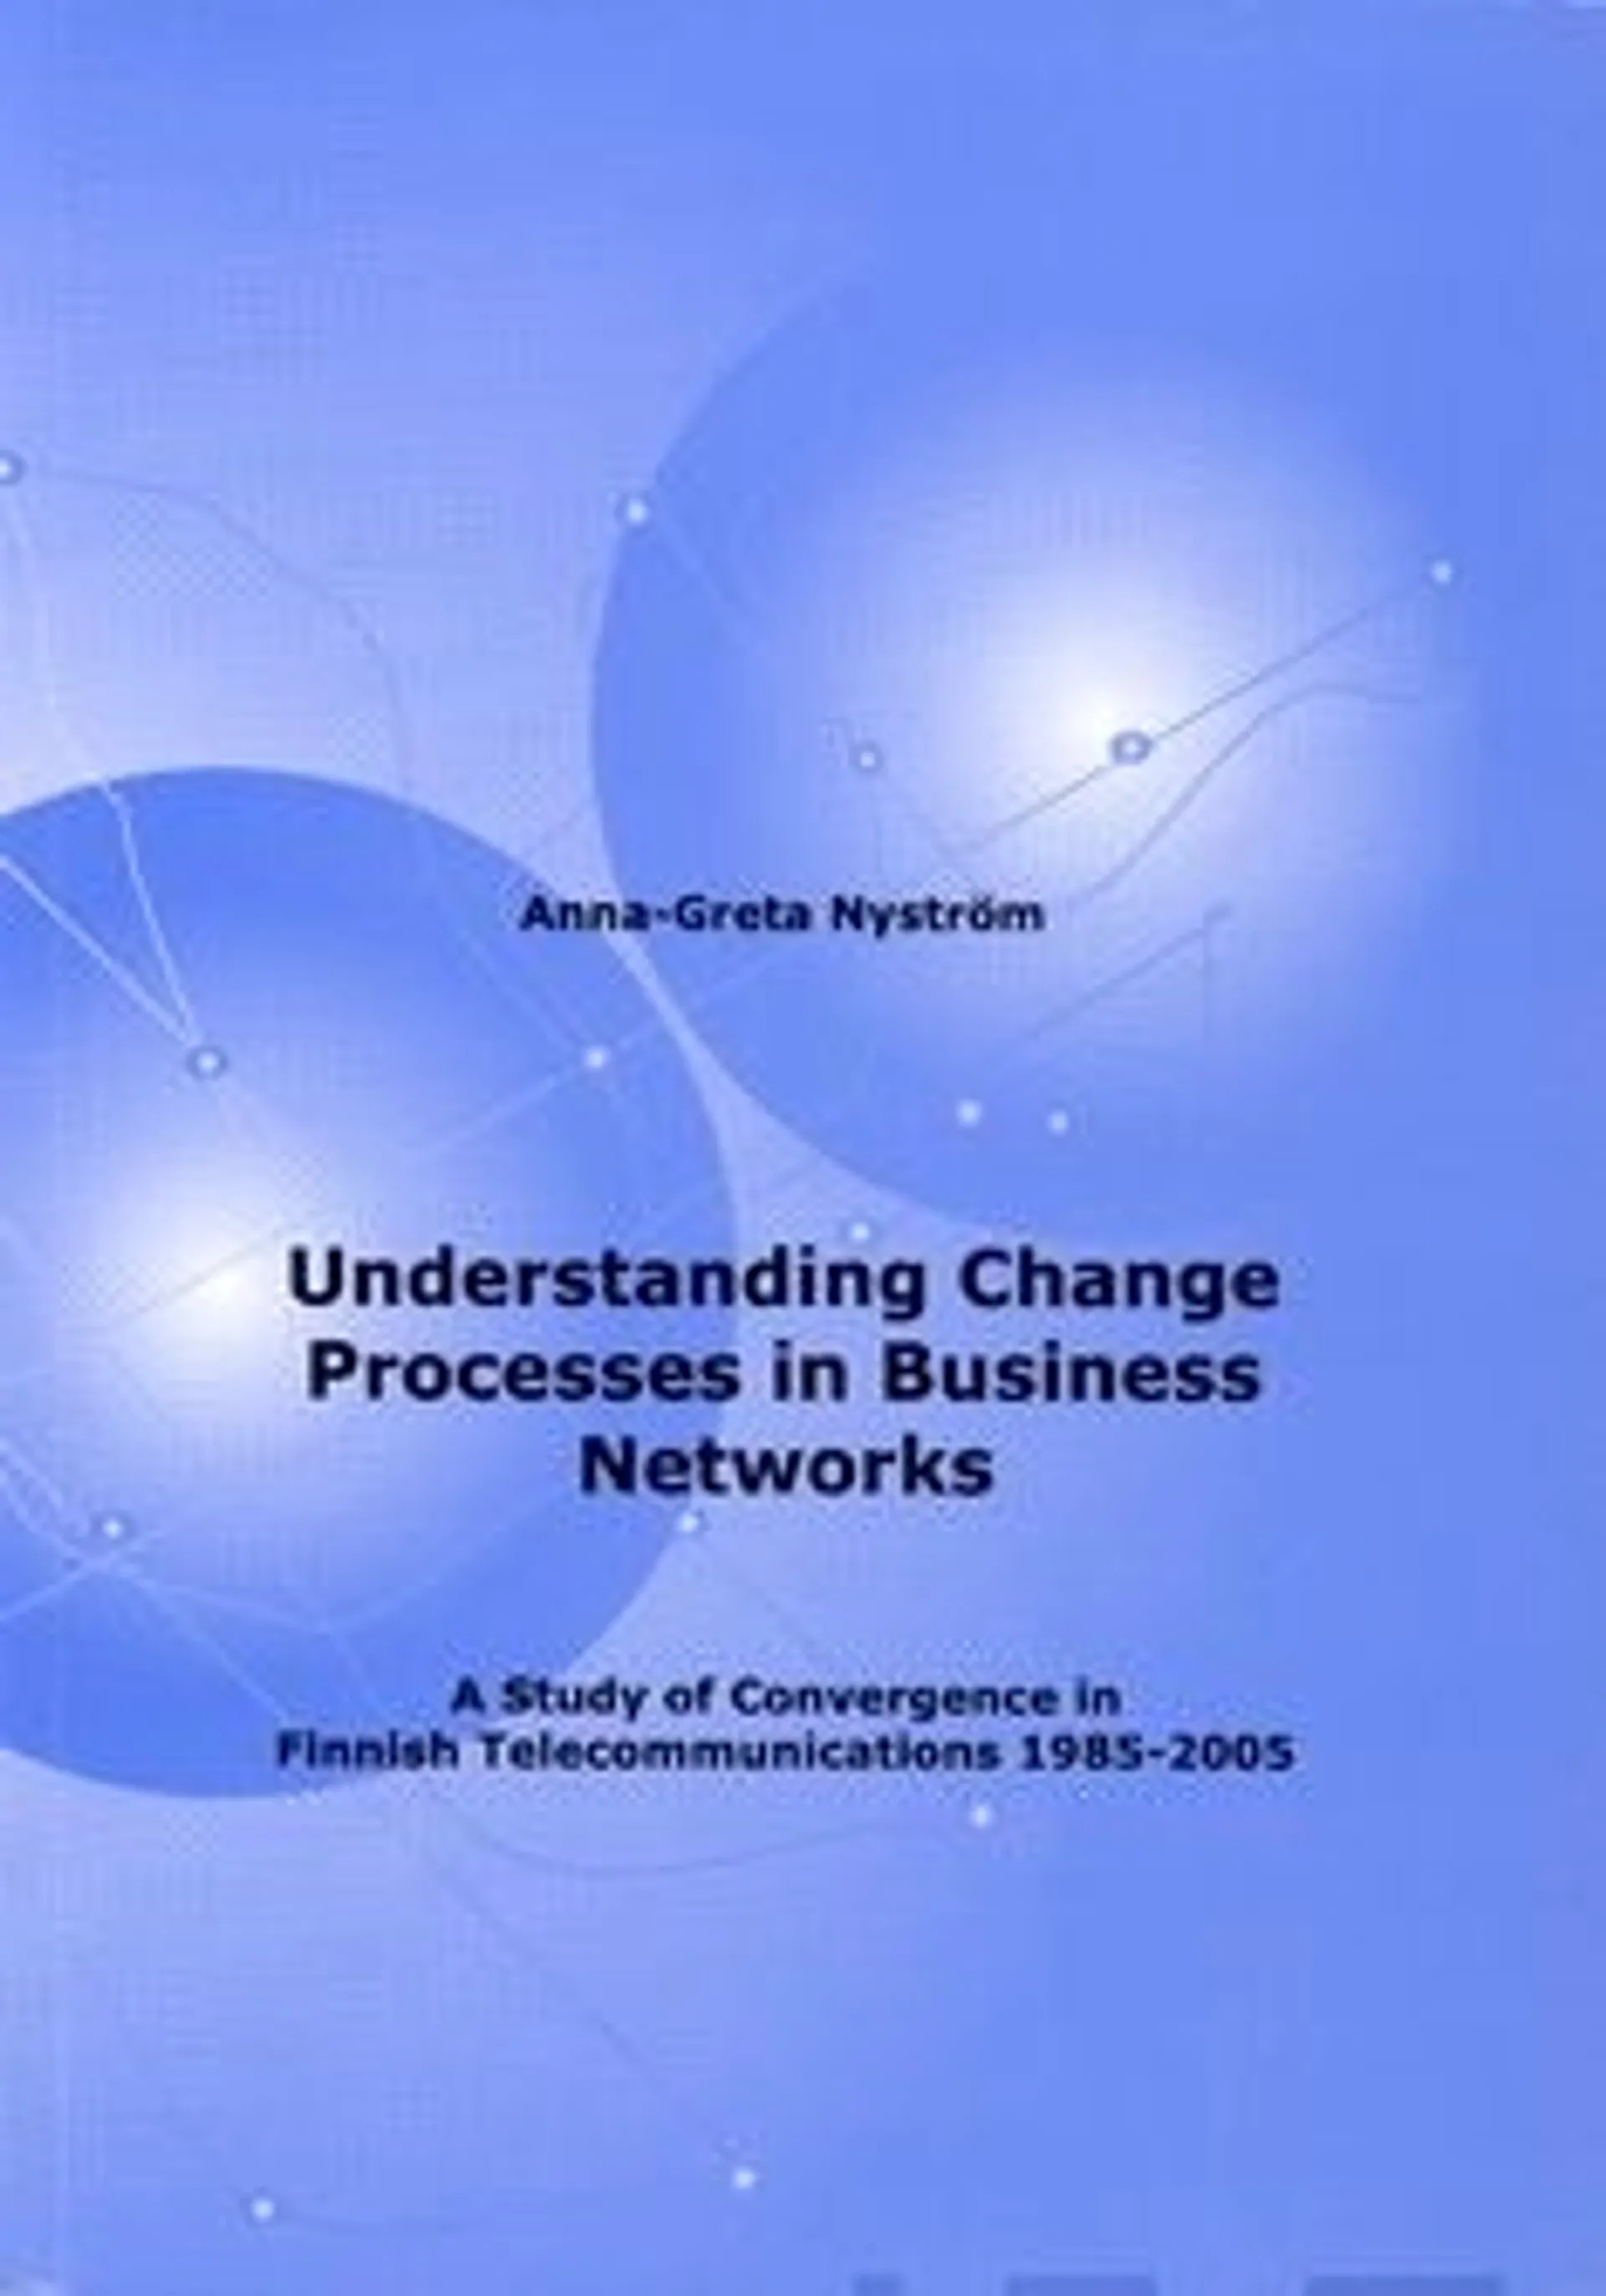 Nyström, Understanding change processess in business networks